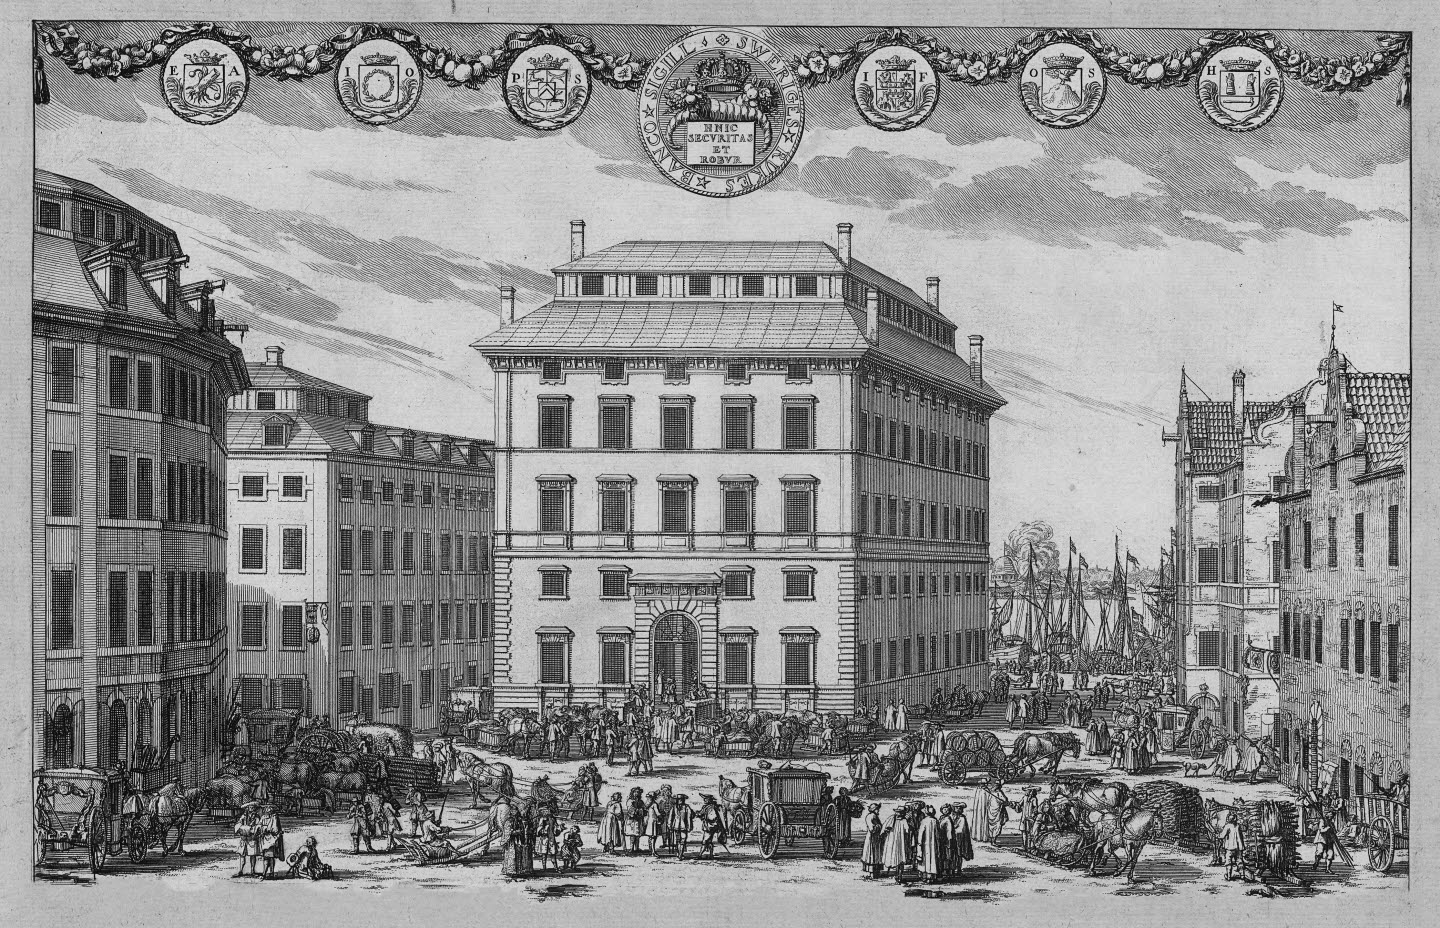 The Riksbank of Sweden moved to the building pictured above in Stockholm in 1680.